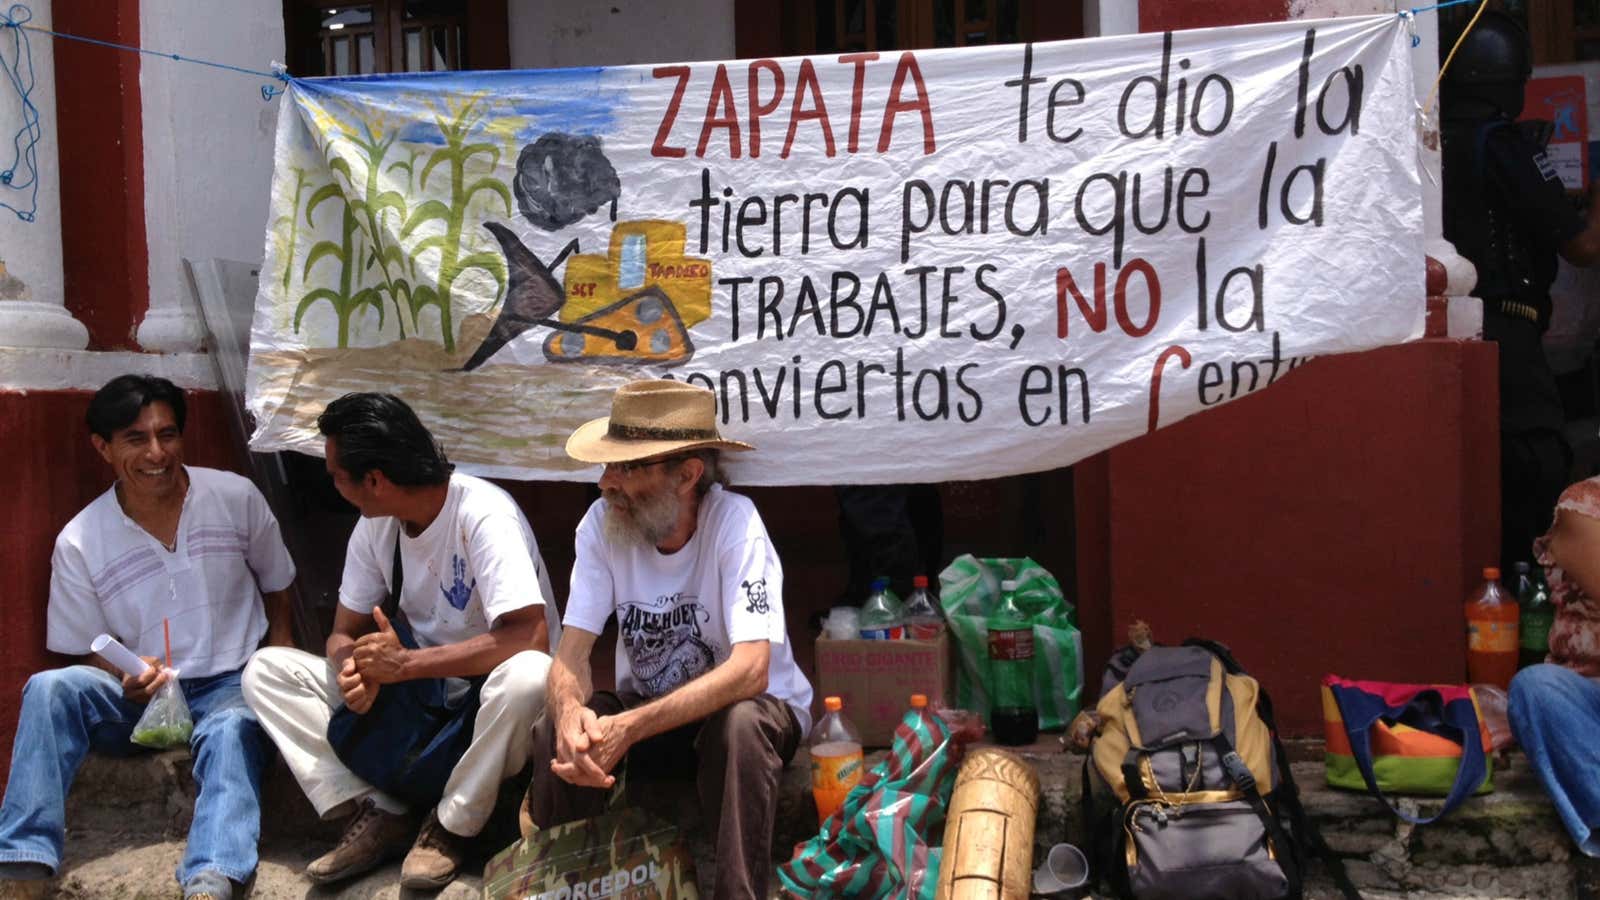 Anti- highway protestors camped out in front of Tepoztlan’s municipal palace. The sign reads: “Zapata gave you the land so that you work it, not to turn it into concrete.”